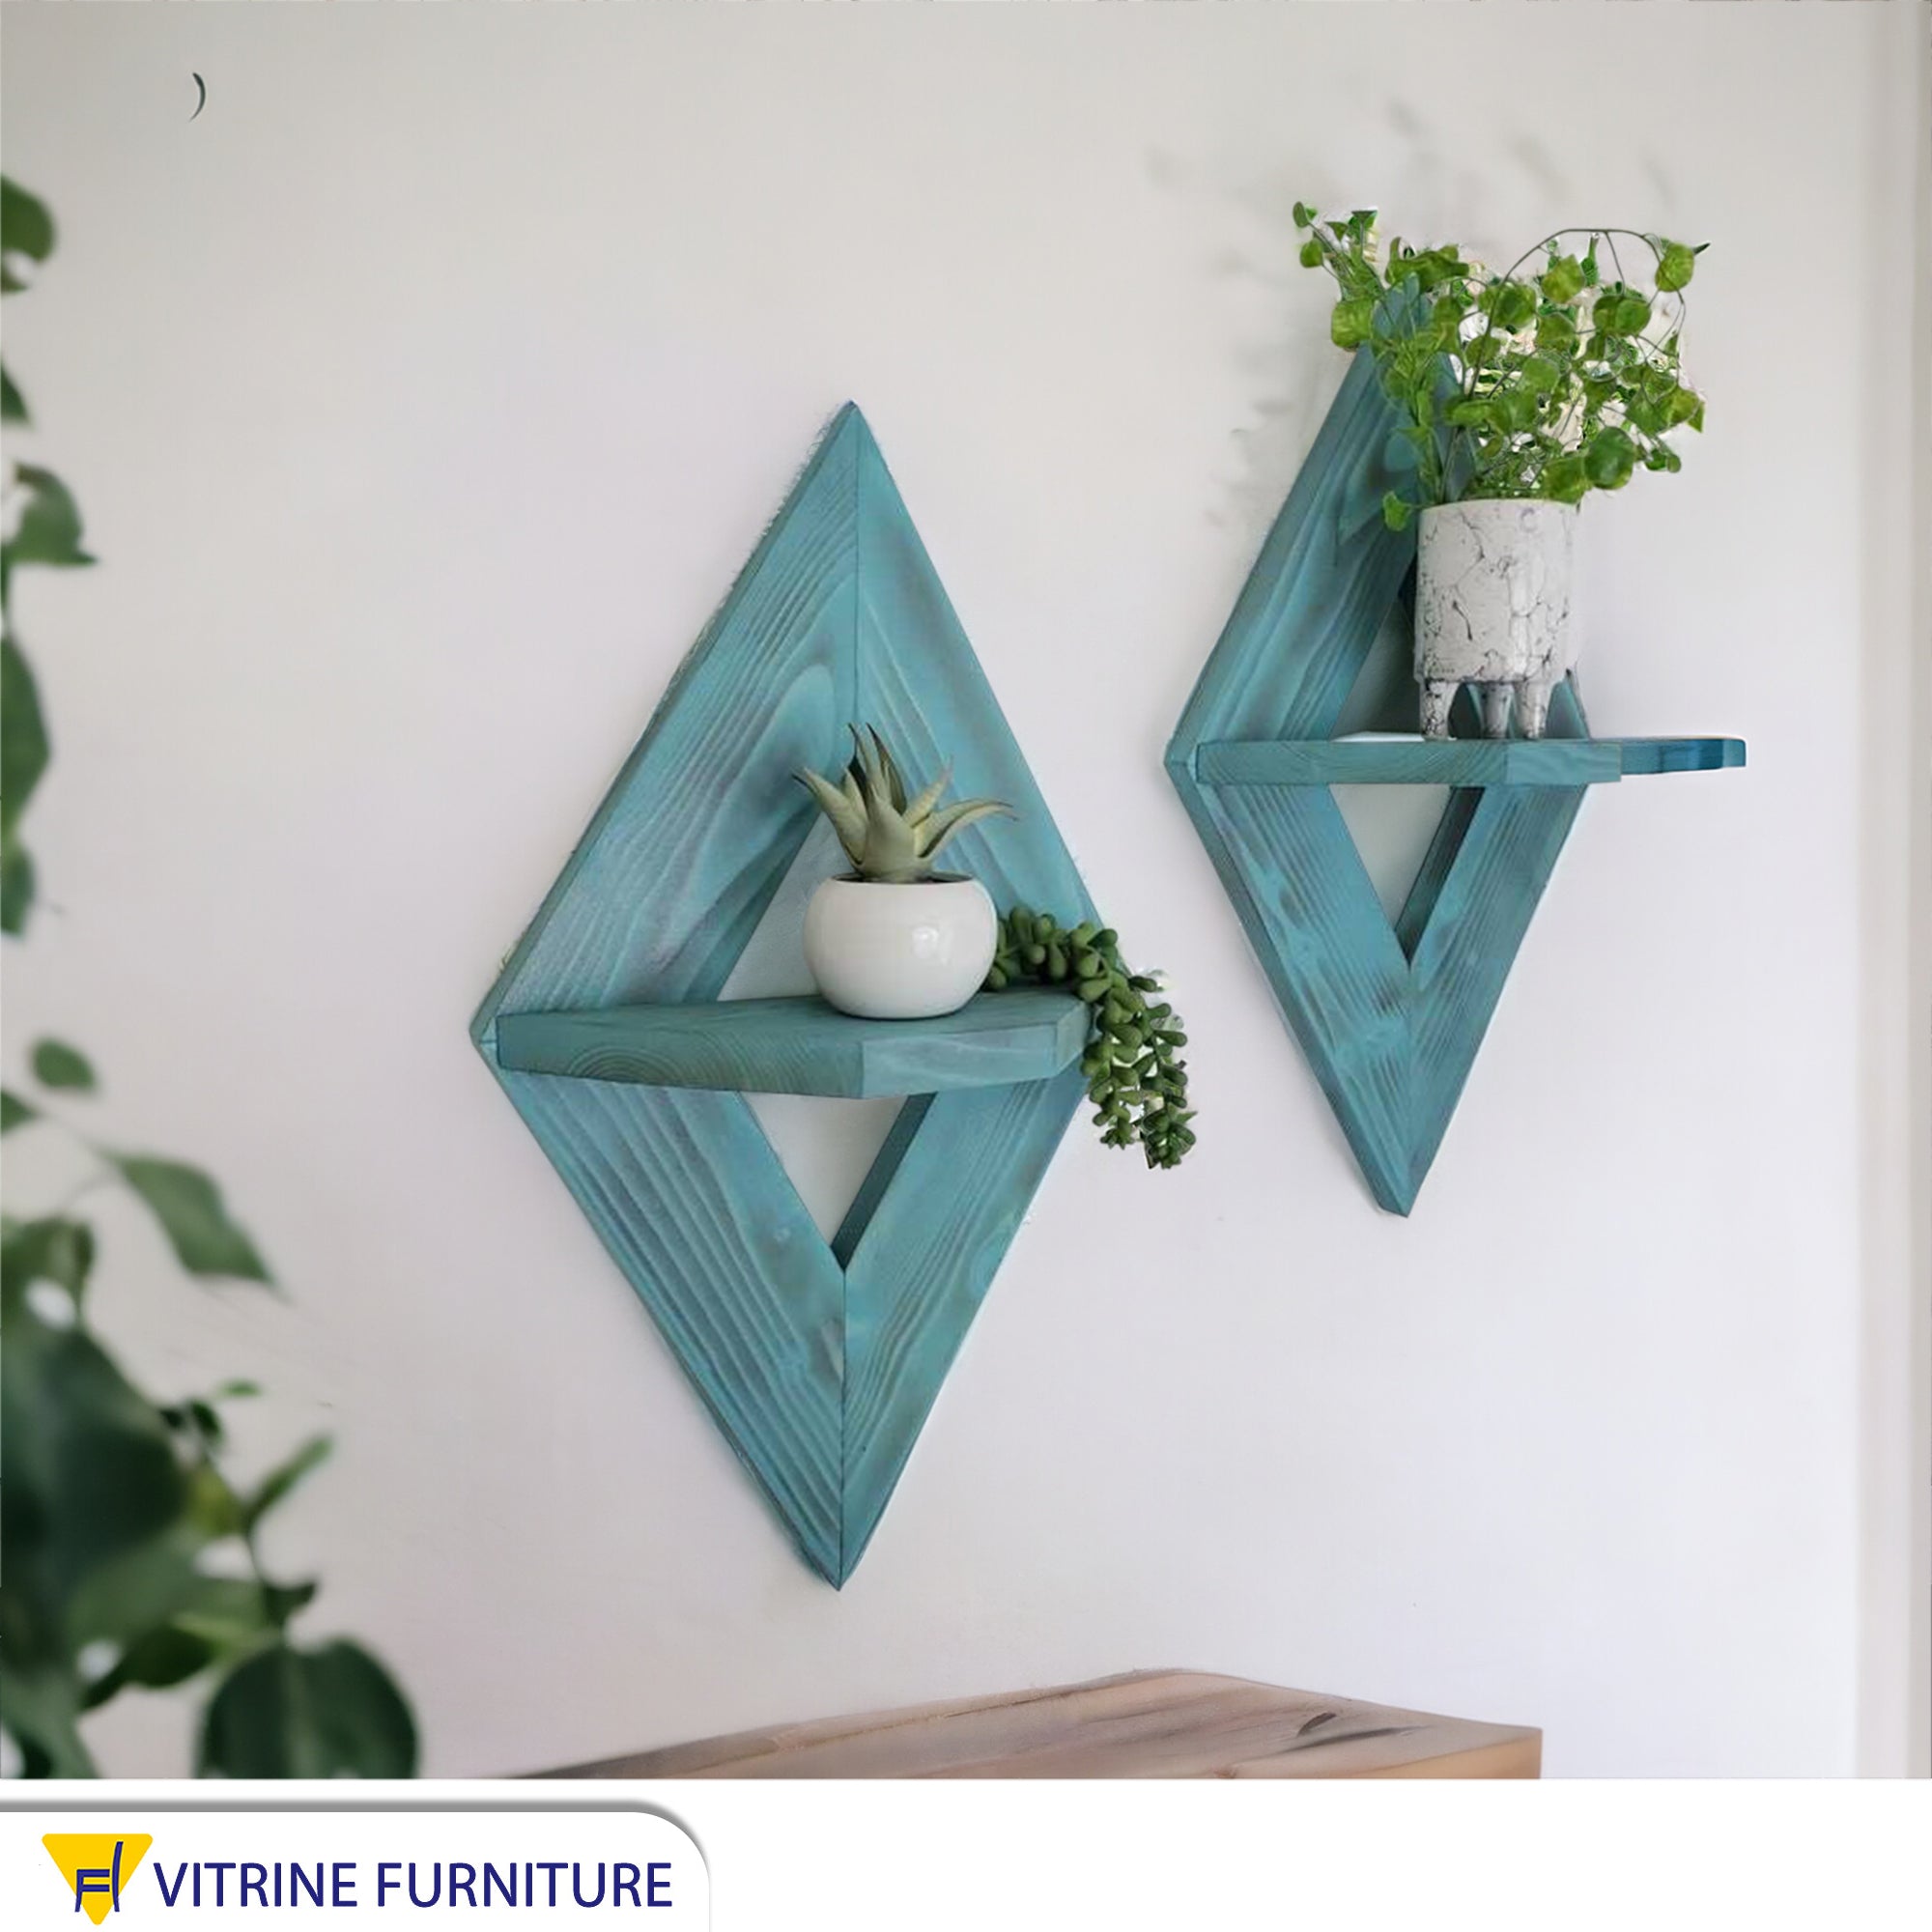 Wall decor in the shape of a diamond in blue